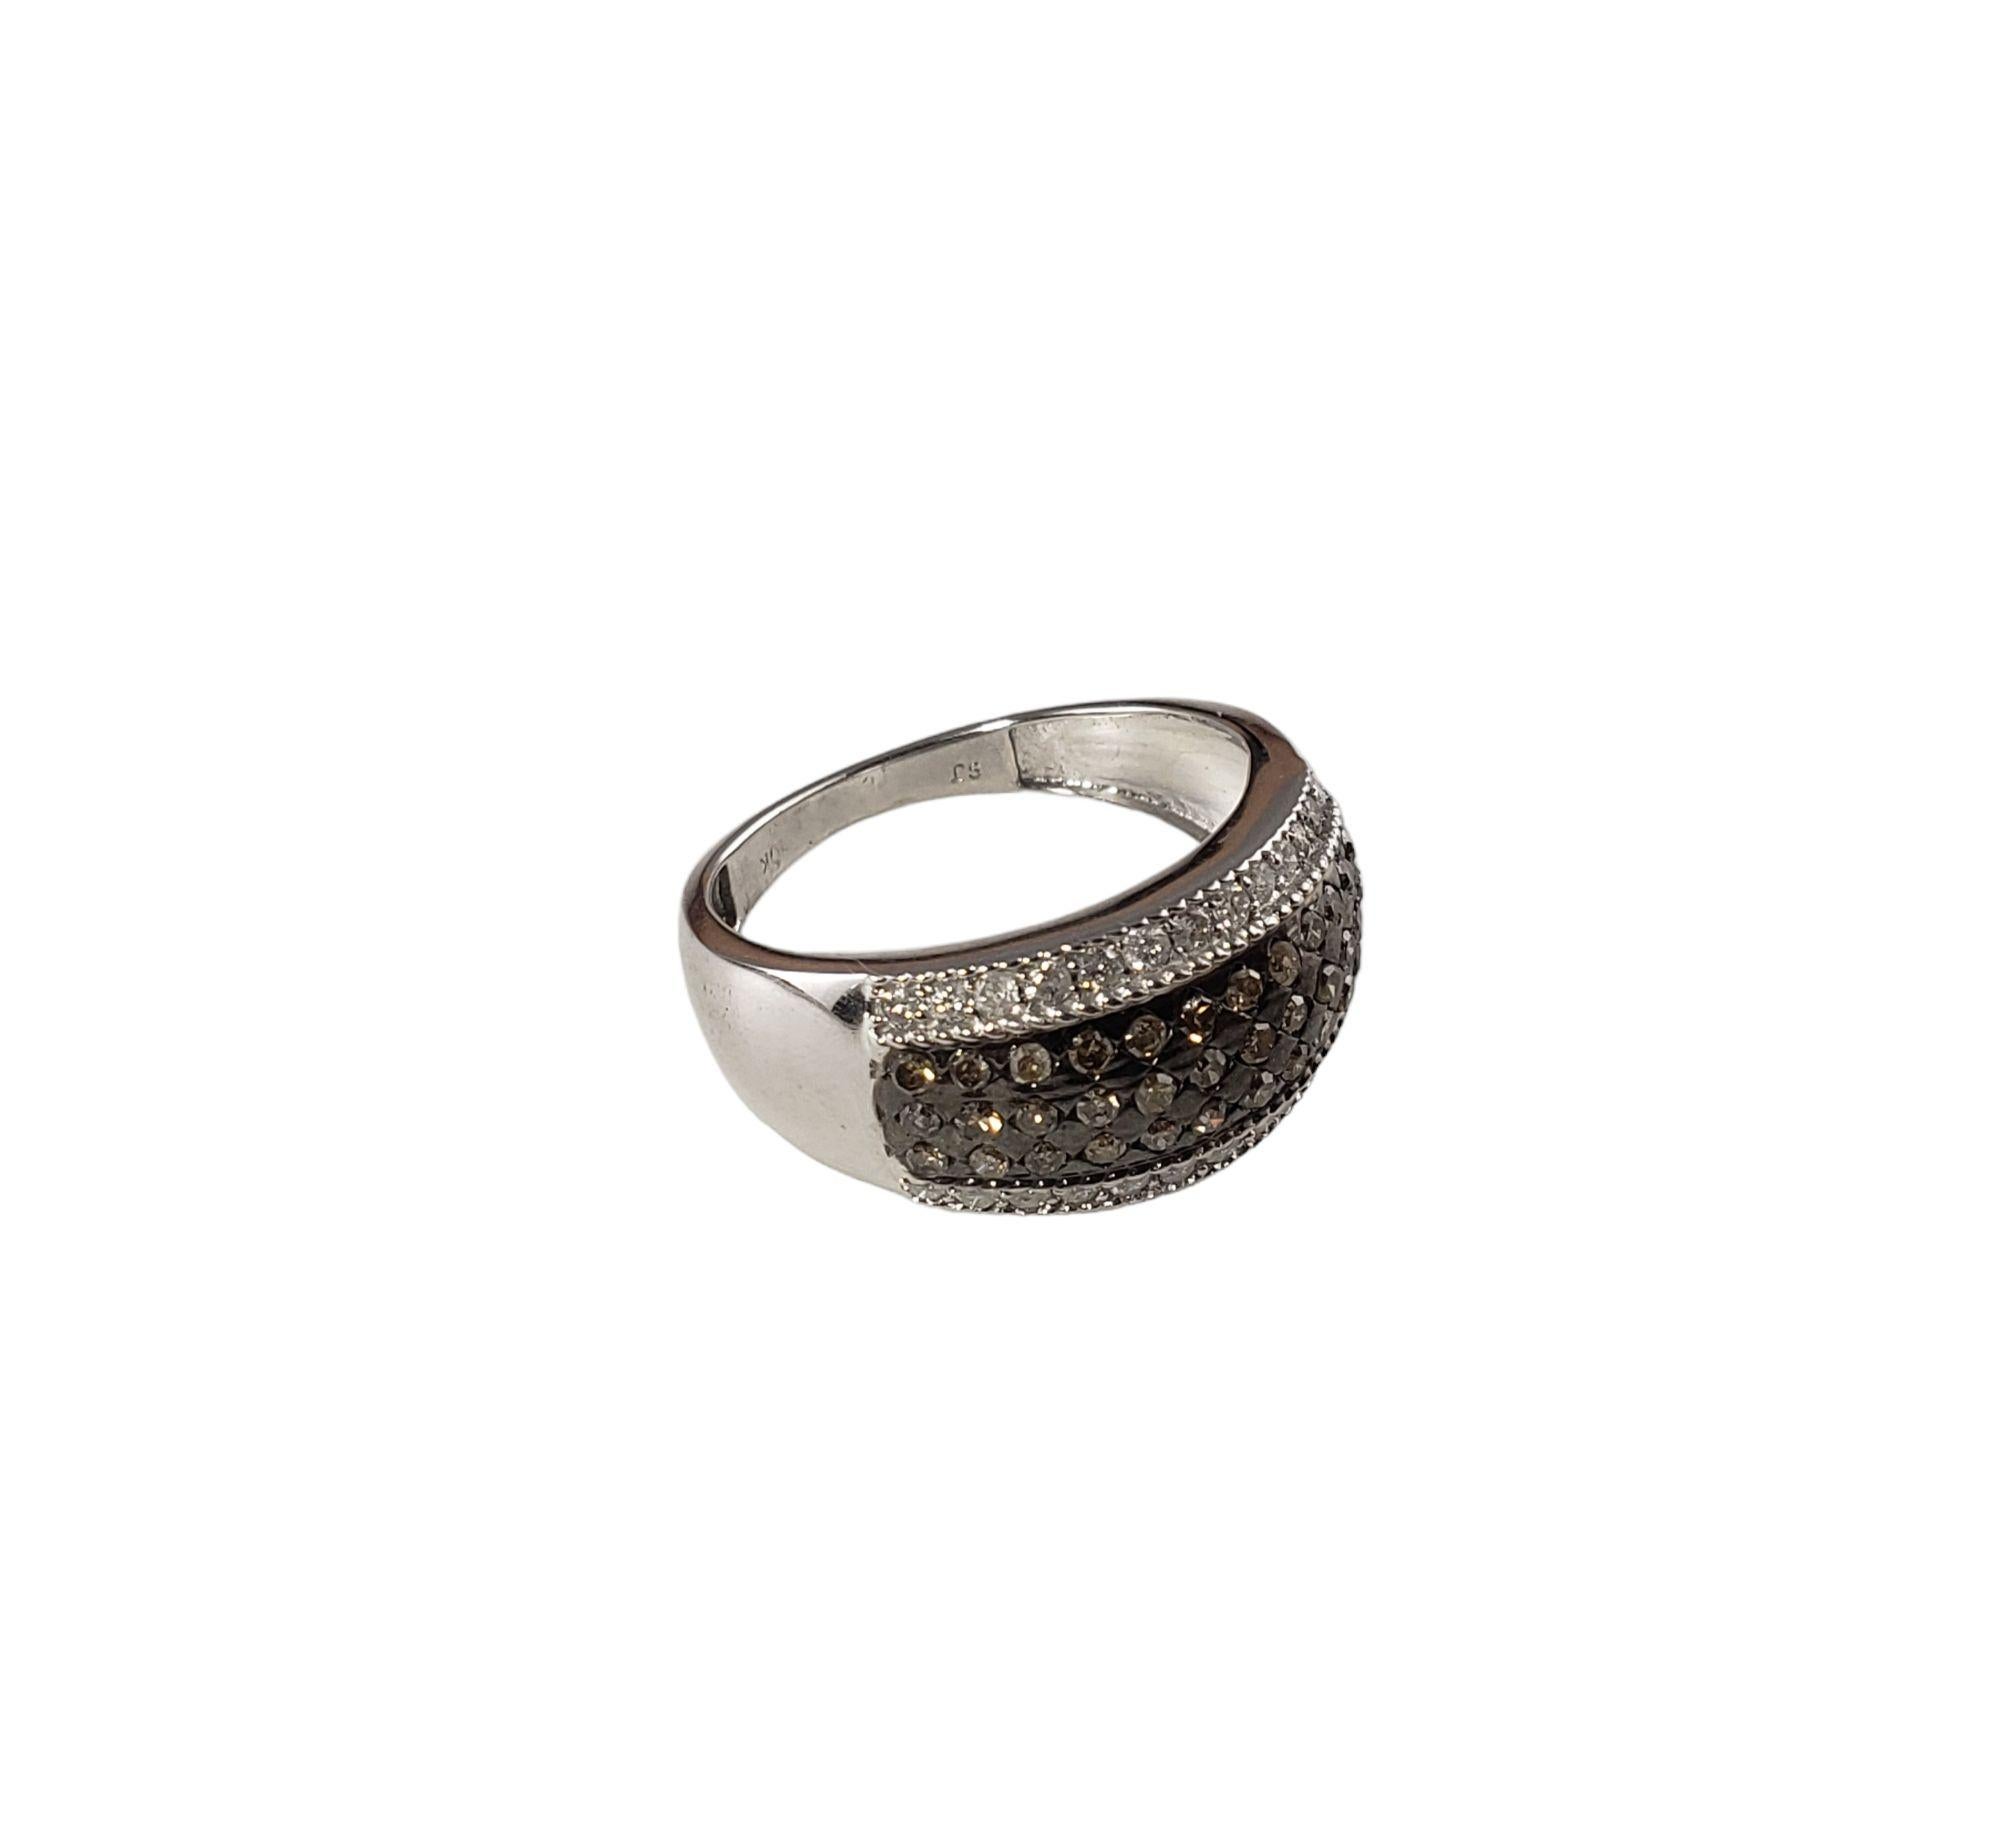 Vintage 10 Karat White Gold Brown and White Diamond Ring Size 8.25-

This sparkling ring features 36 brown round single cut diamonds and 26 white round single cut diamonds set in classic 10K white gold. Width: 10 mm. Shank: 2 mm.

Total diamond